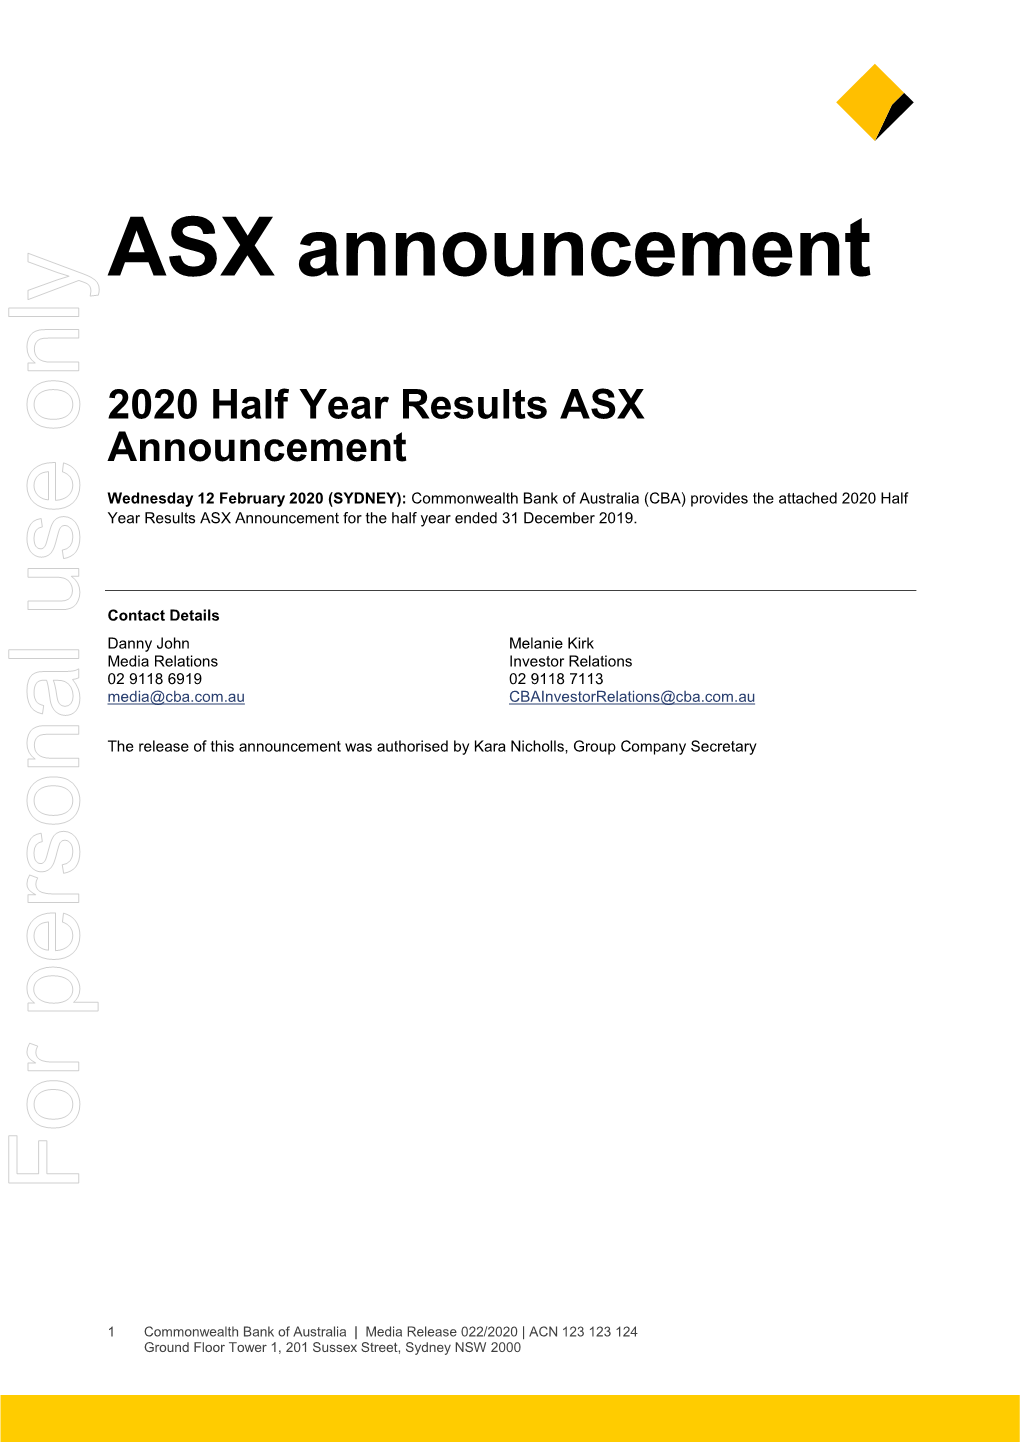 2020 Half Year Results ASX Announcement